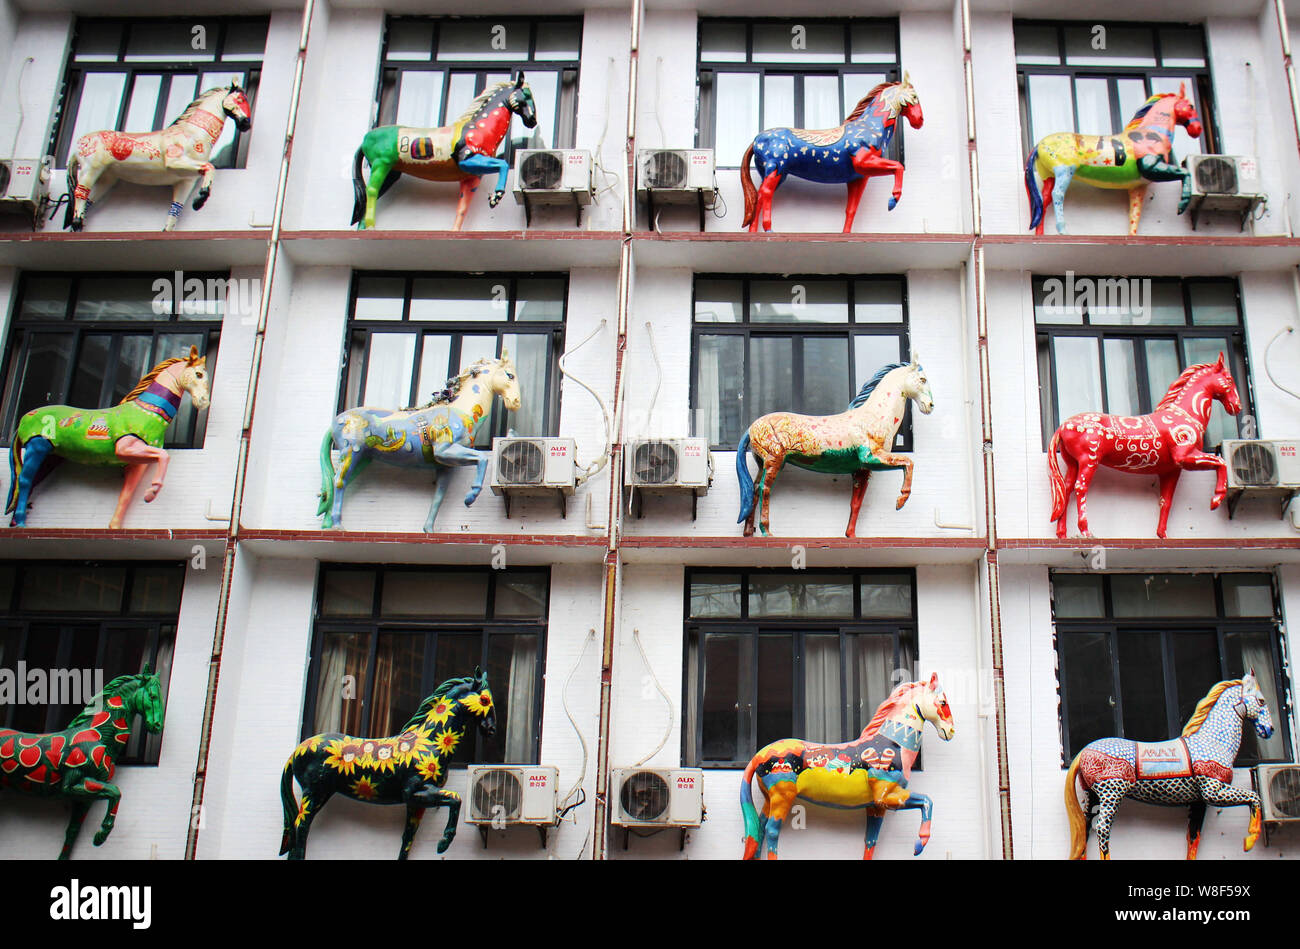 Horse sculptures are on display outside the windows of guest rooms in a hotel building in Chongqing, China, 21 November 2015.   Though the Year of the Stock Photo